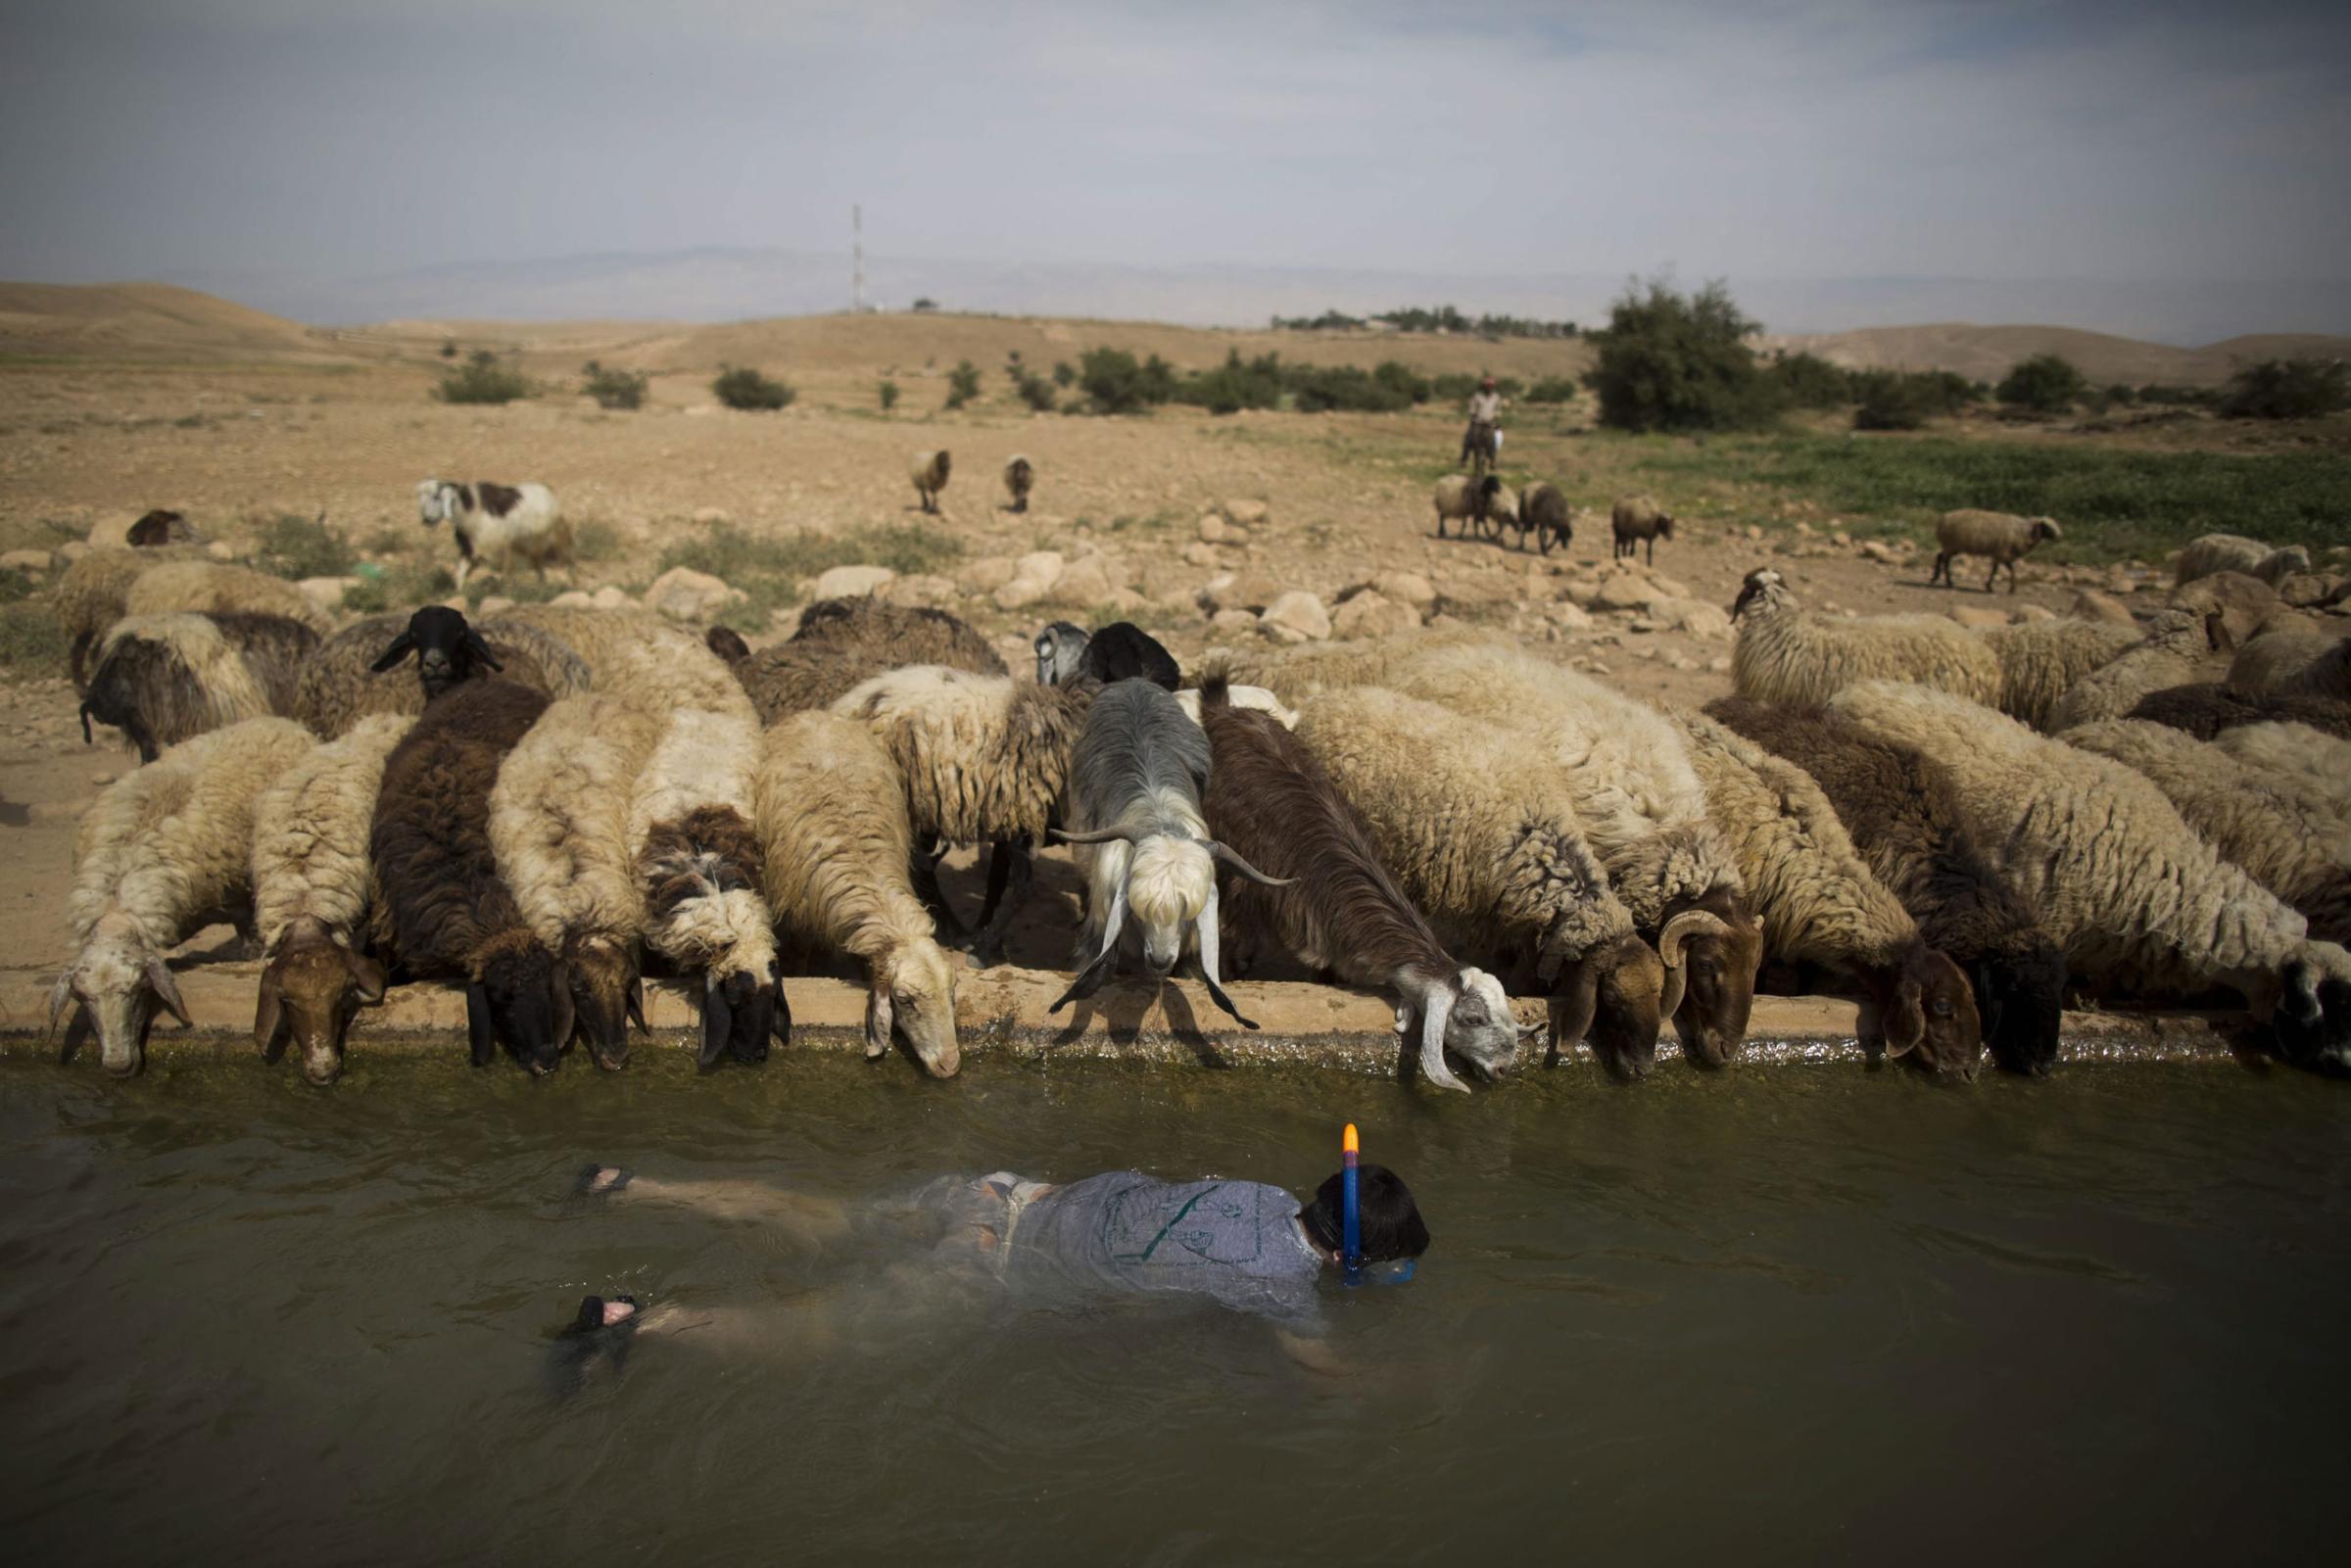 A young Israeli settler snorkels as sheep belonging to a Palestinian shepherd drink water from a spring located in the Jordan Valley near the Palestinian village of Uja, near the West Bank town of Jericho. April 8, 2015.